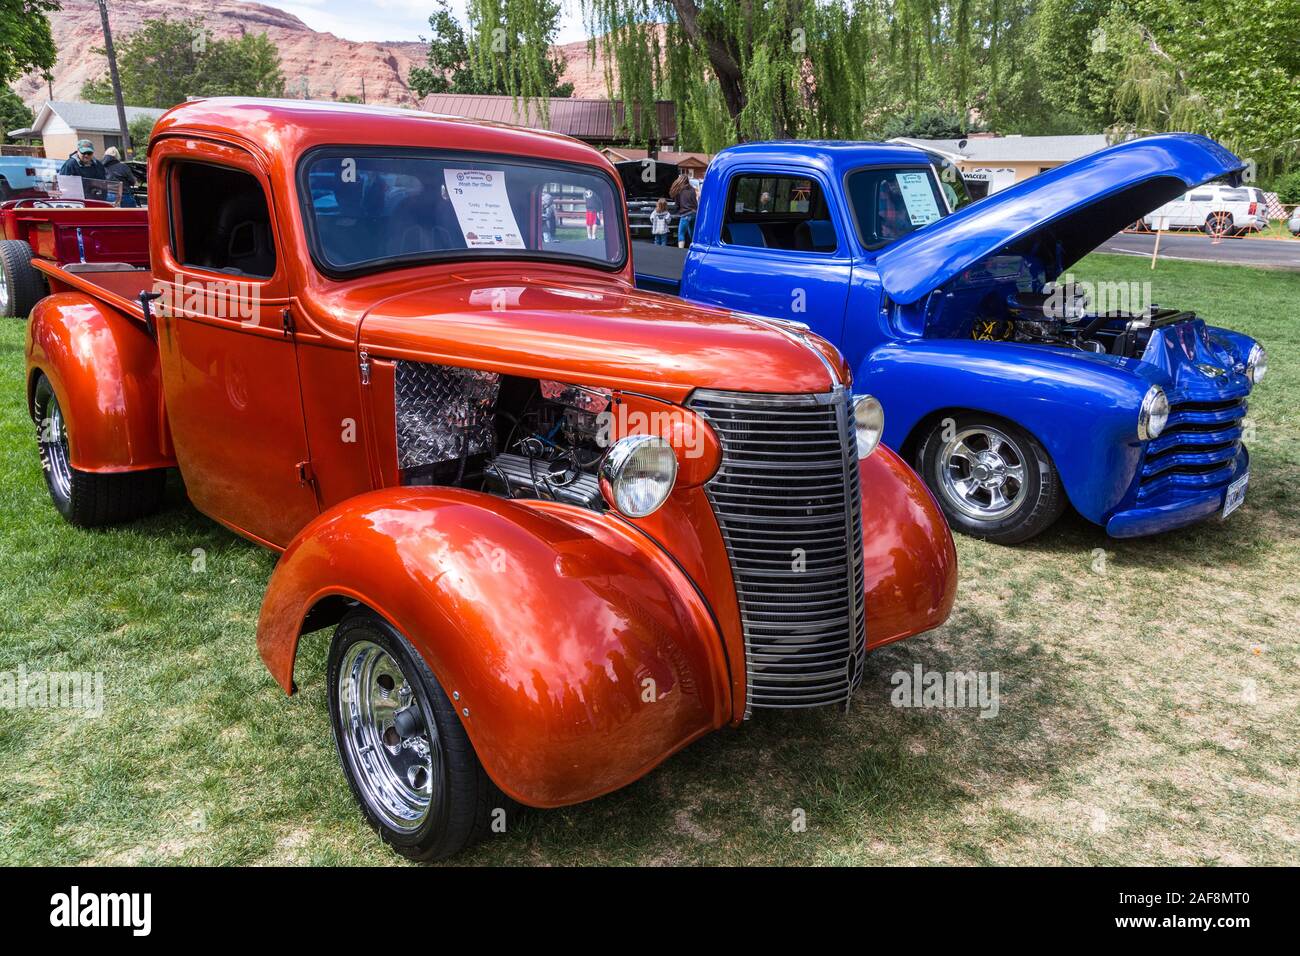 A restored and modified 1938 Chevy Pickup Truck in the Moab April Action Car Show in Moab, Utah.  Next to it is a blue 1951 Chevy 3100 Pickup Truck. Stock Photo